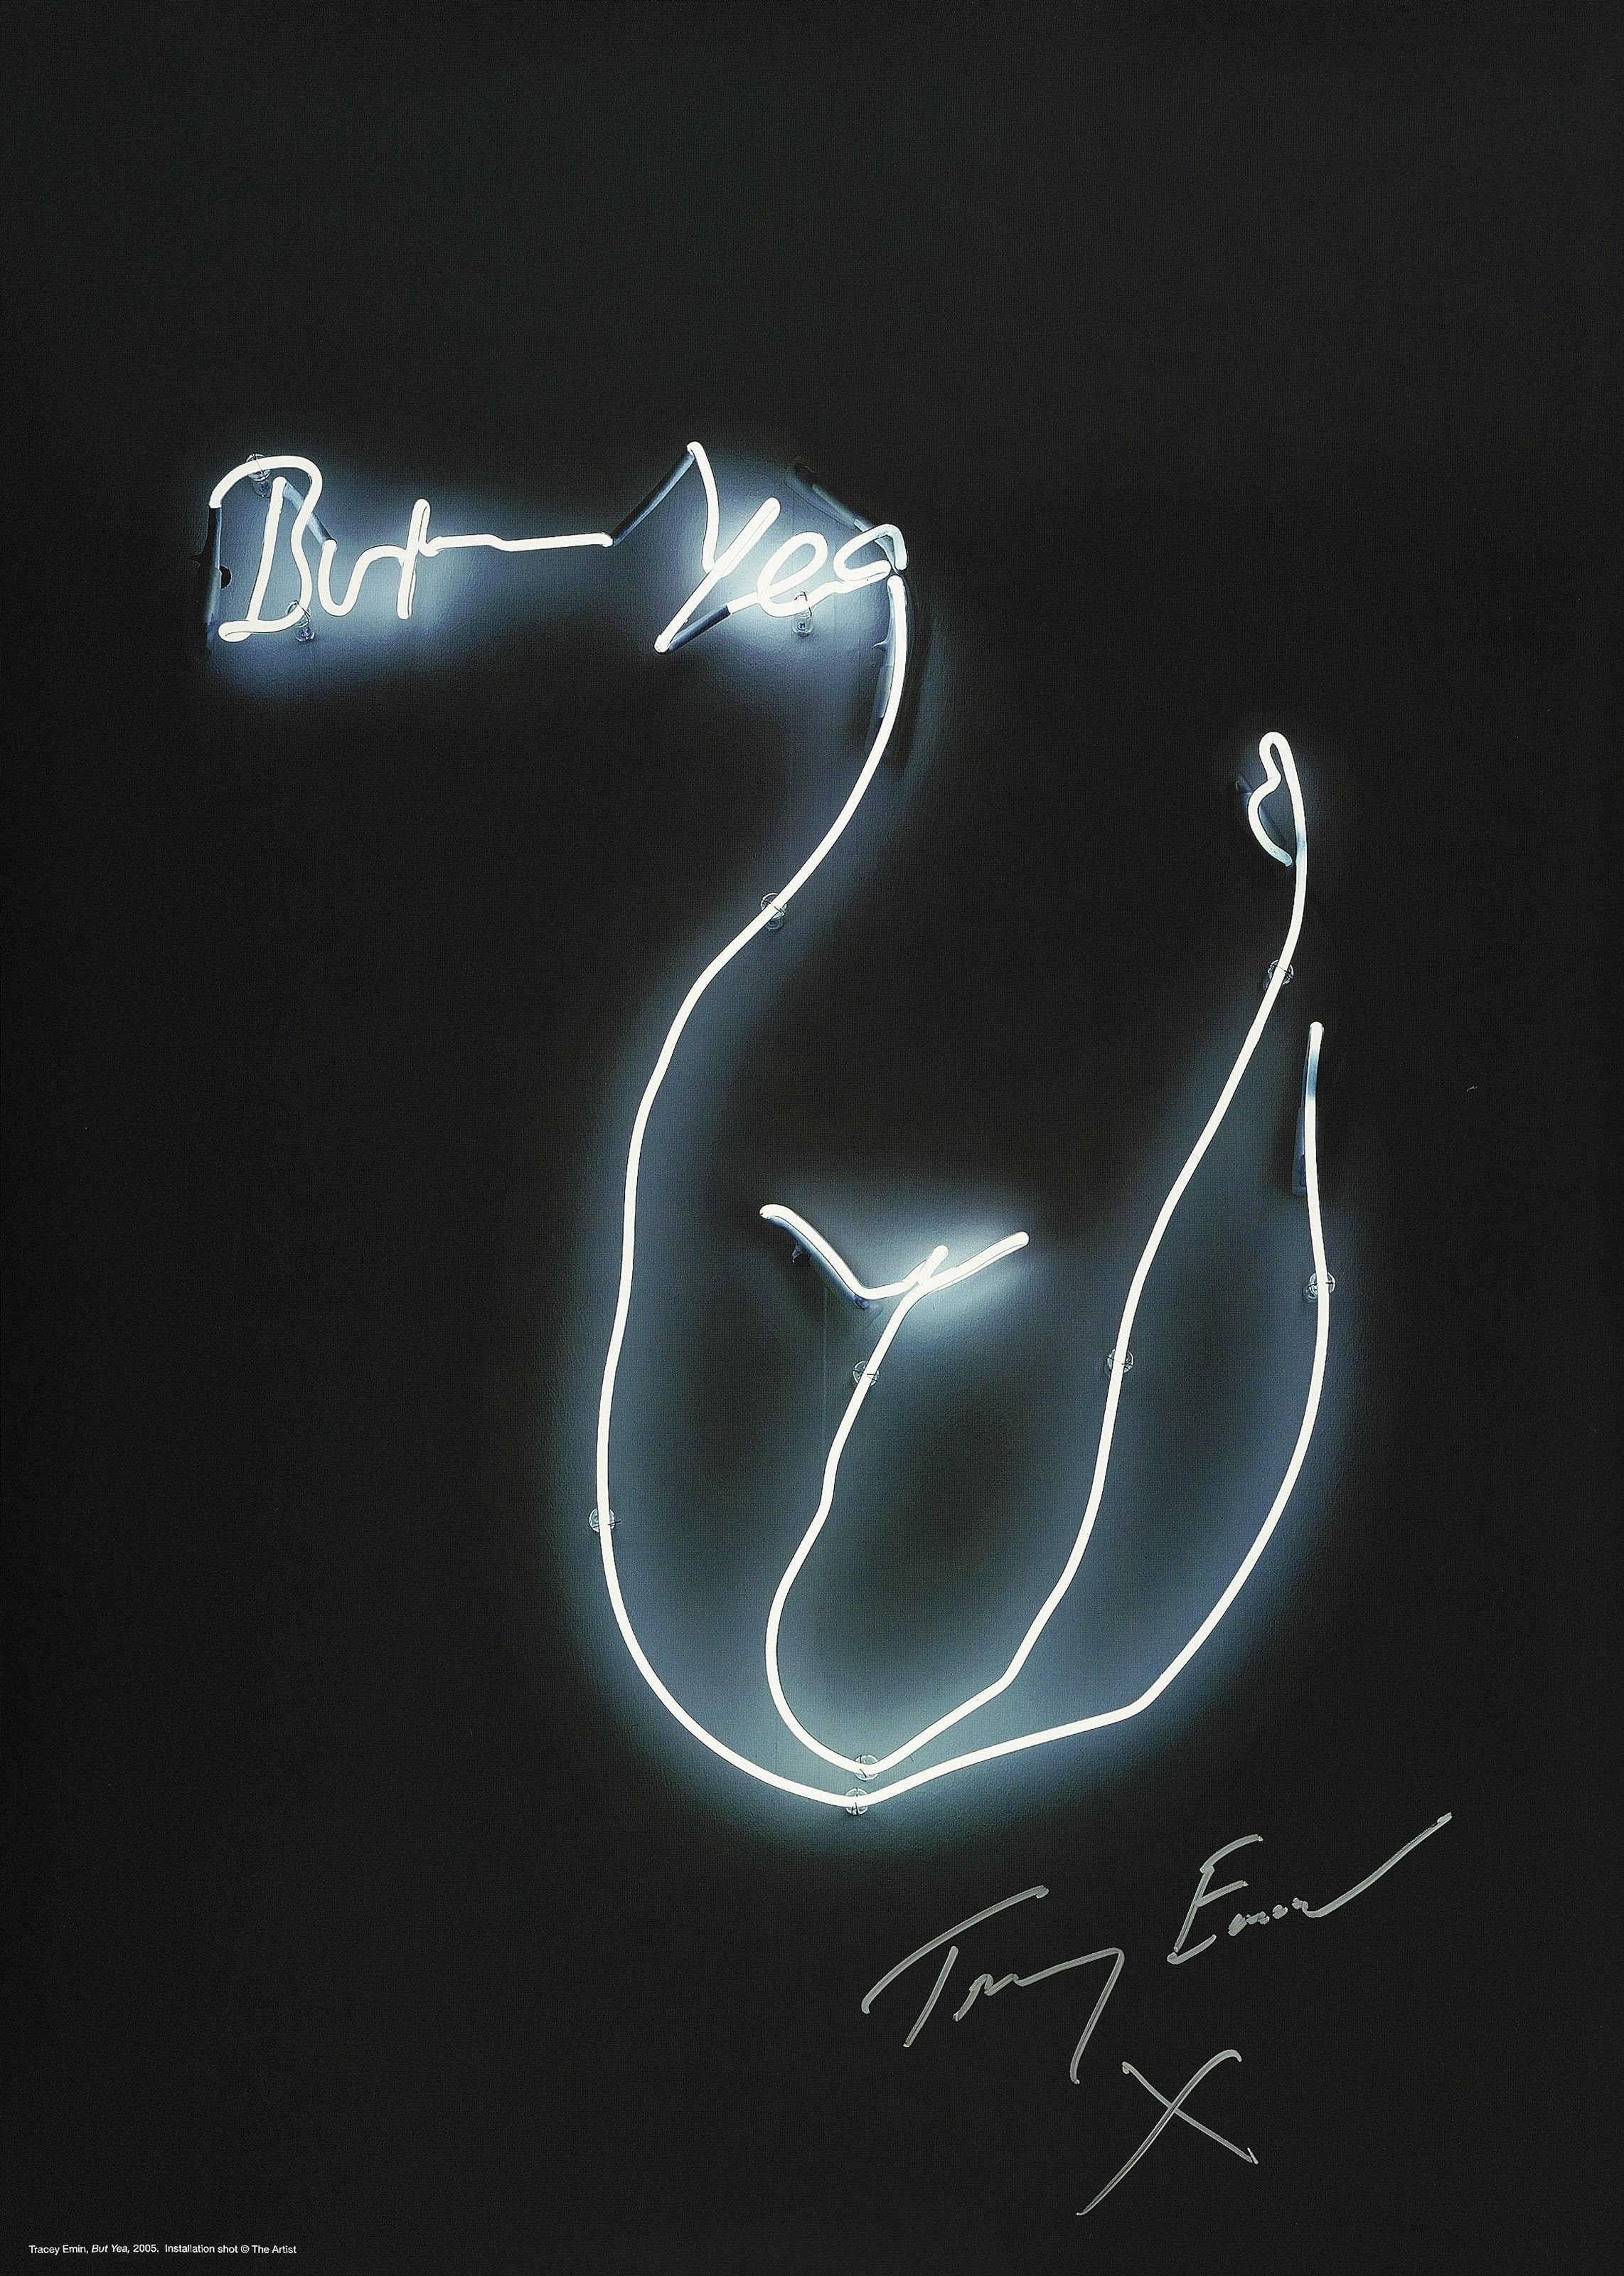 Tracey Emin Figurative Print - But Yea, Young British Artist, Contemporary Art, 21st Century